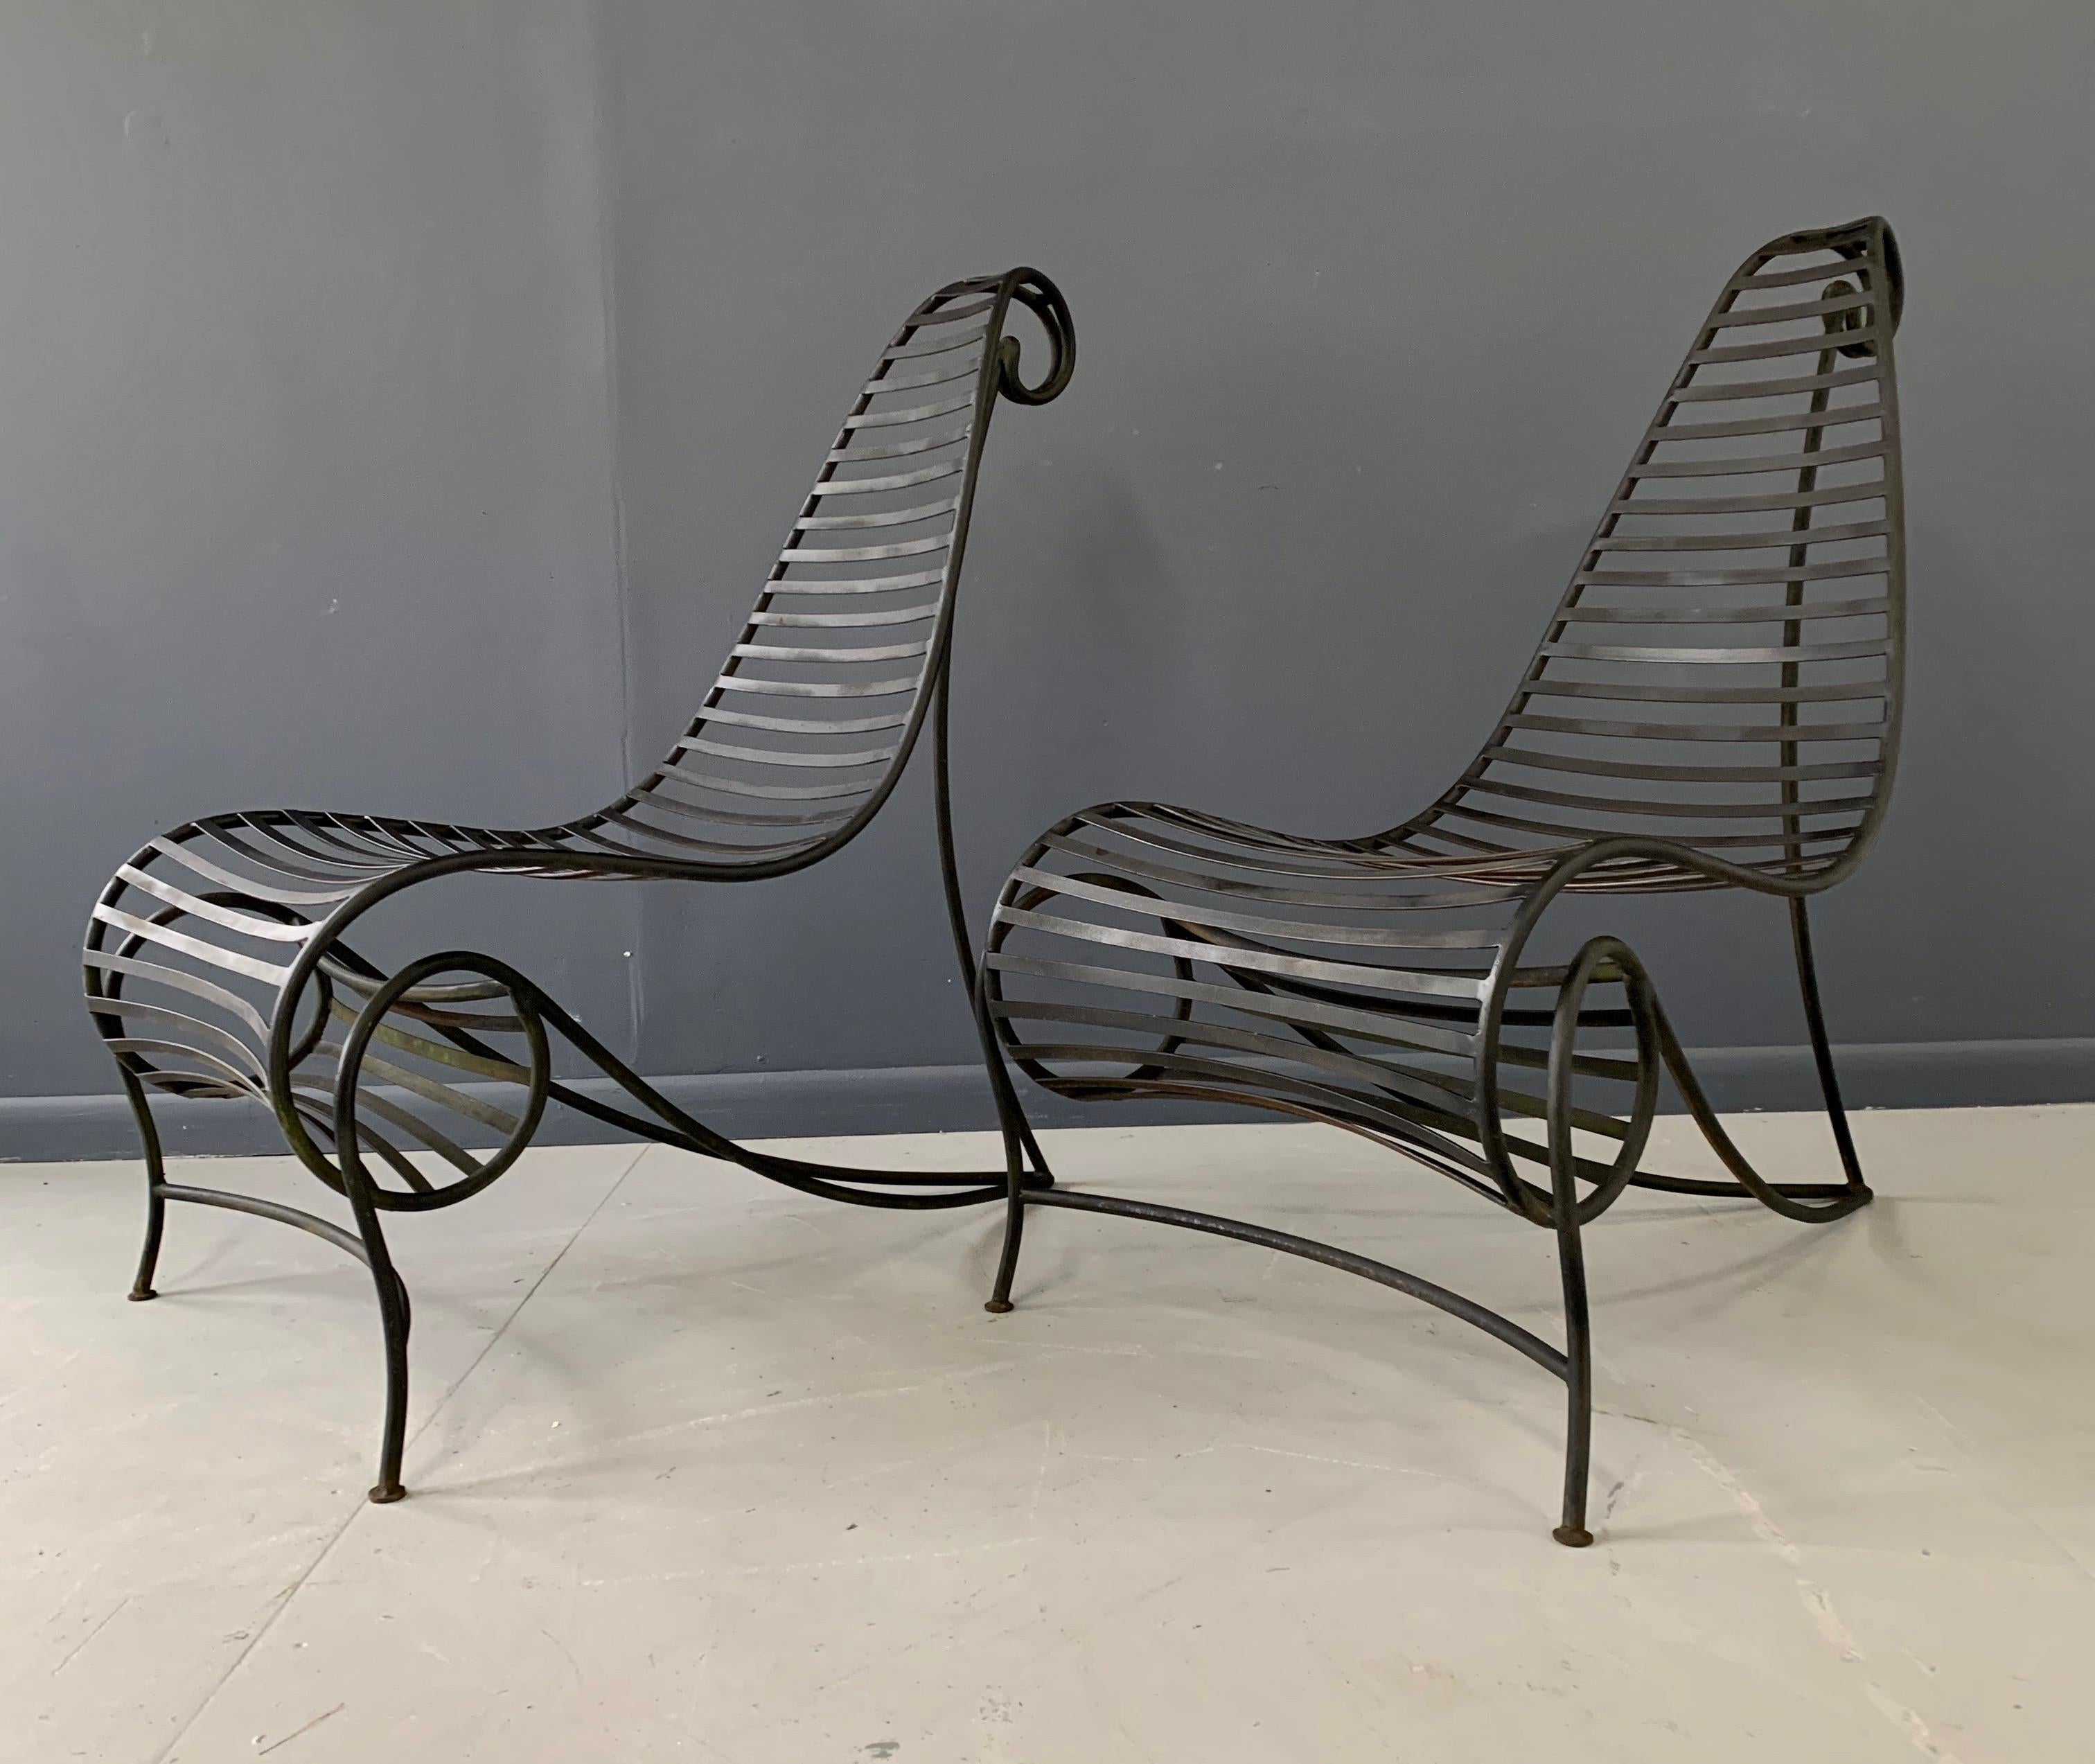 The early Spine chairs were fabricated in Dubreuil's workshop in London and modeled on his original prototype. There were a limited number of these chairs made and they are distinguished by a black paint finish.
In the late 1980s or early 1990s